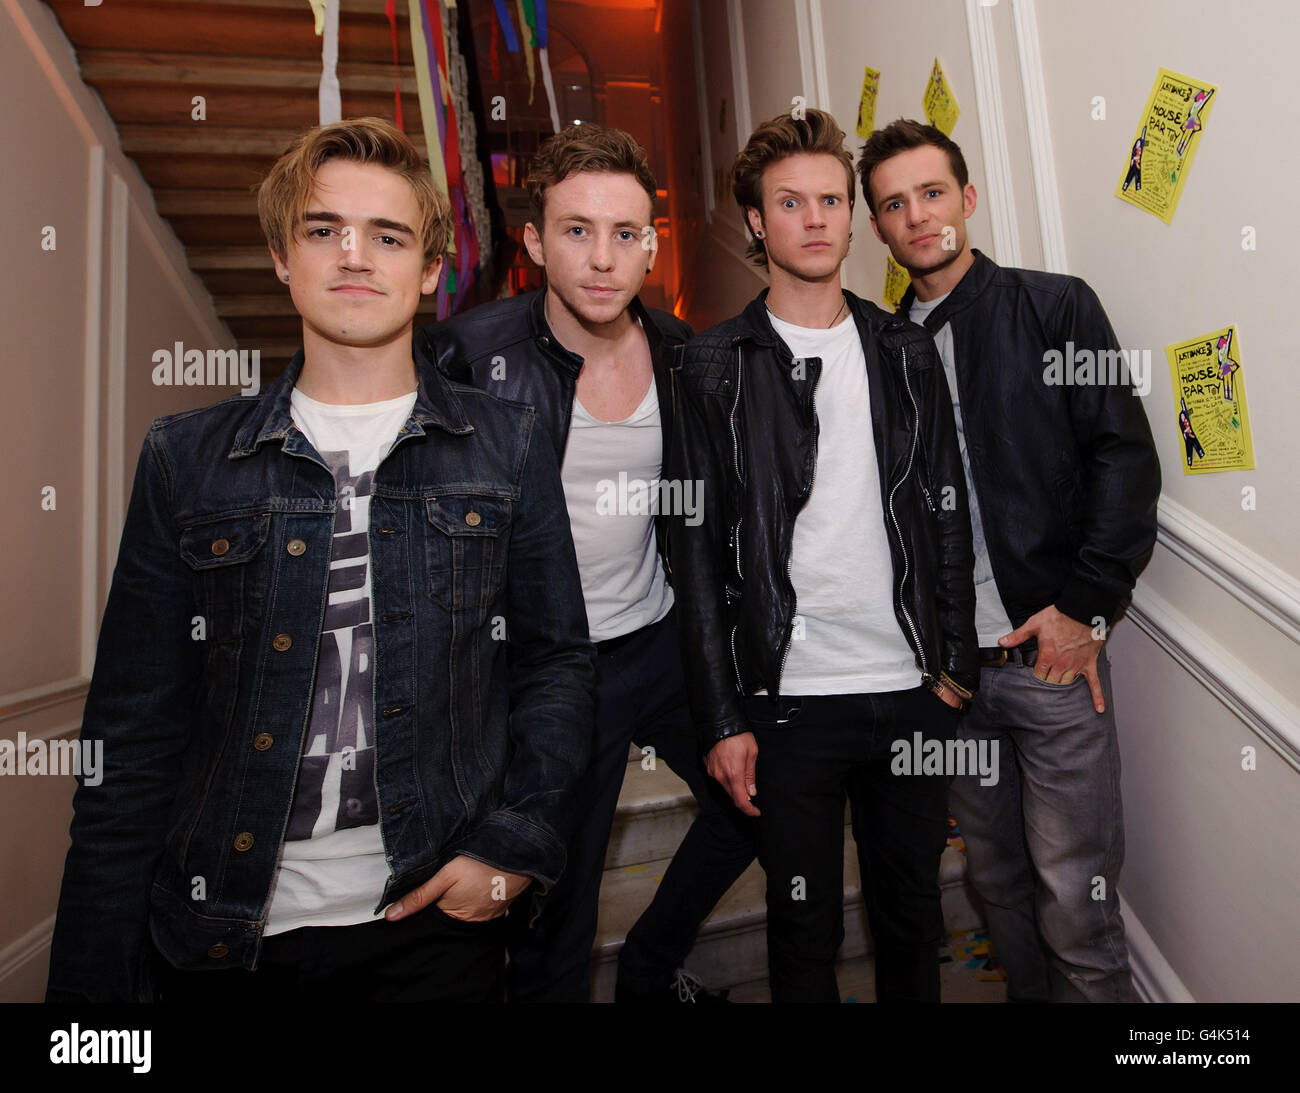 McFly (left to right) Tom Fletcher, Danny Jones, Dougie Poynter, Harry Judd, attend the launch of the video game, Just Dance 3 at Il Bottaccio in central London. Stock Photo